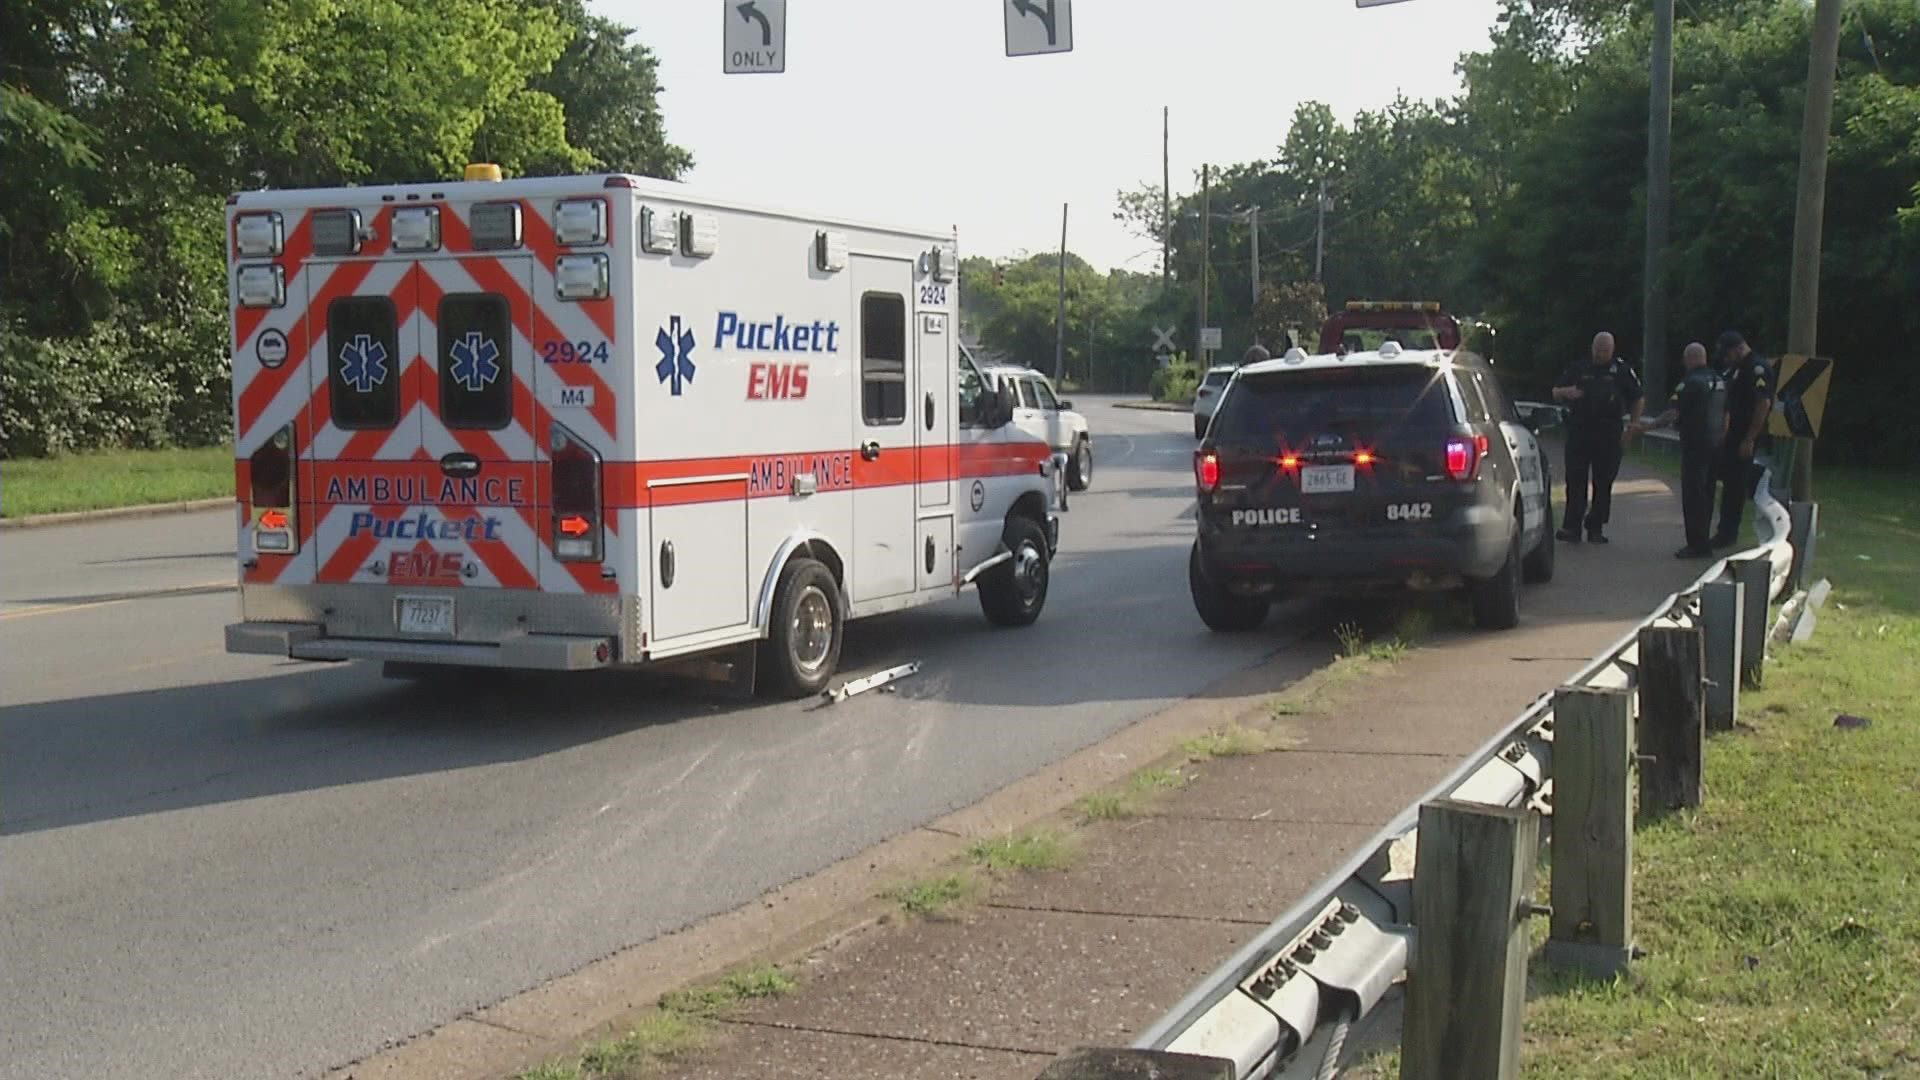 Chattanooga police responded to a call about a stolen ambulance Thursday morning around 1300 N. Holtzclaw Avenue.